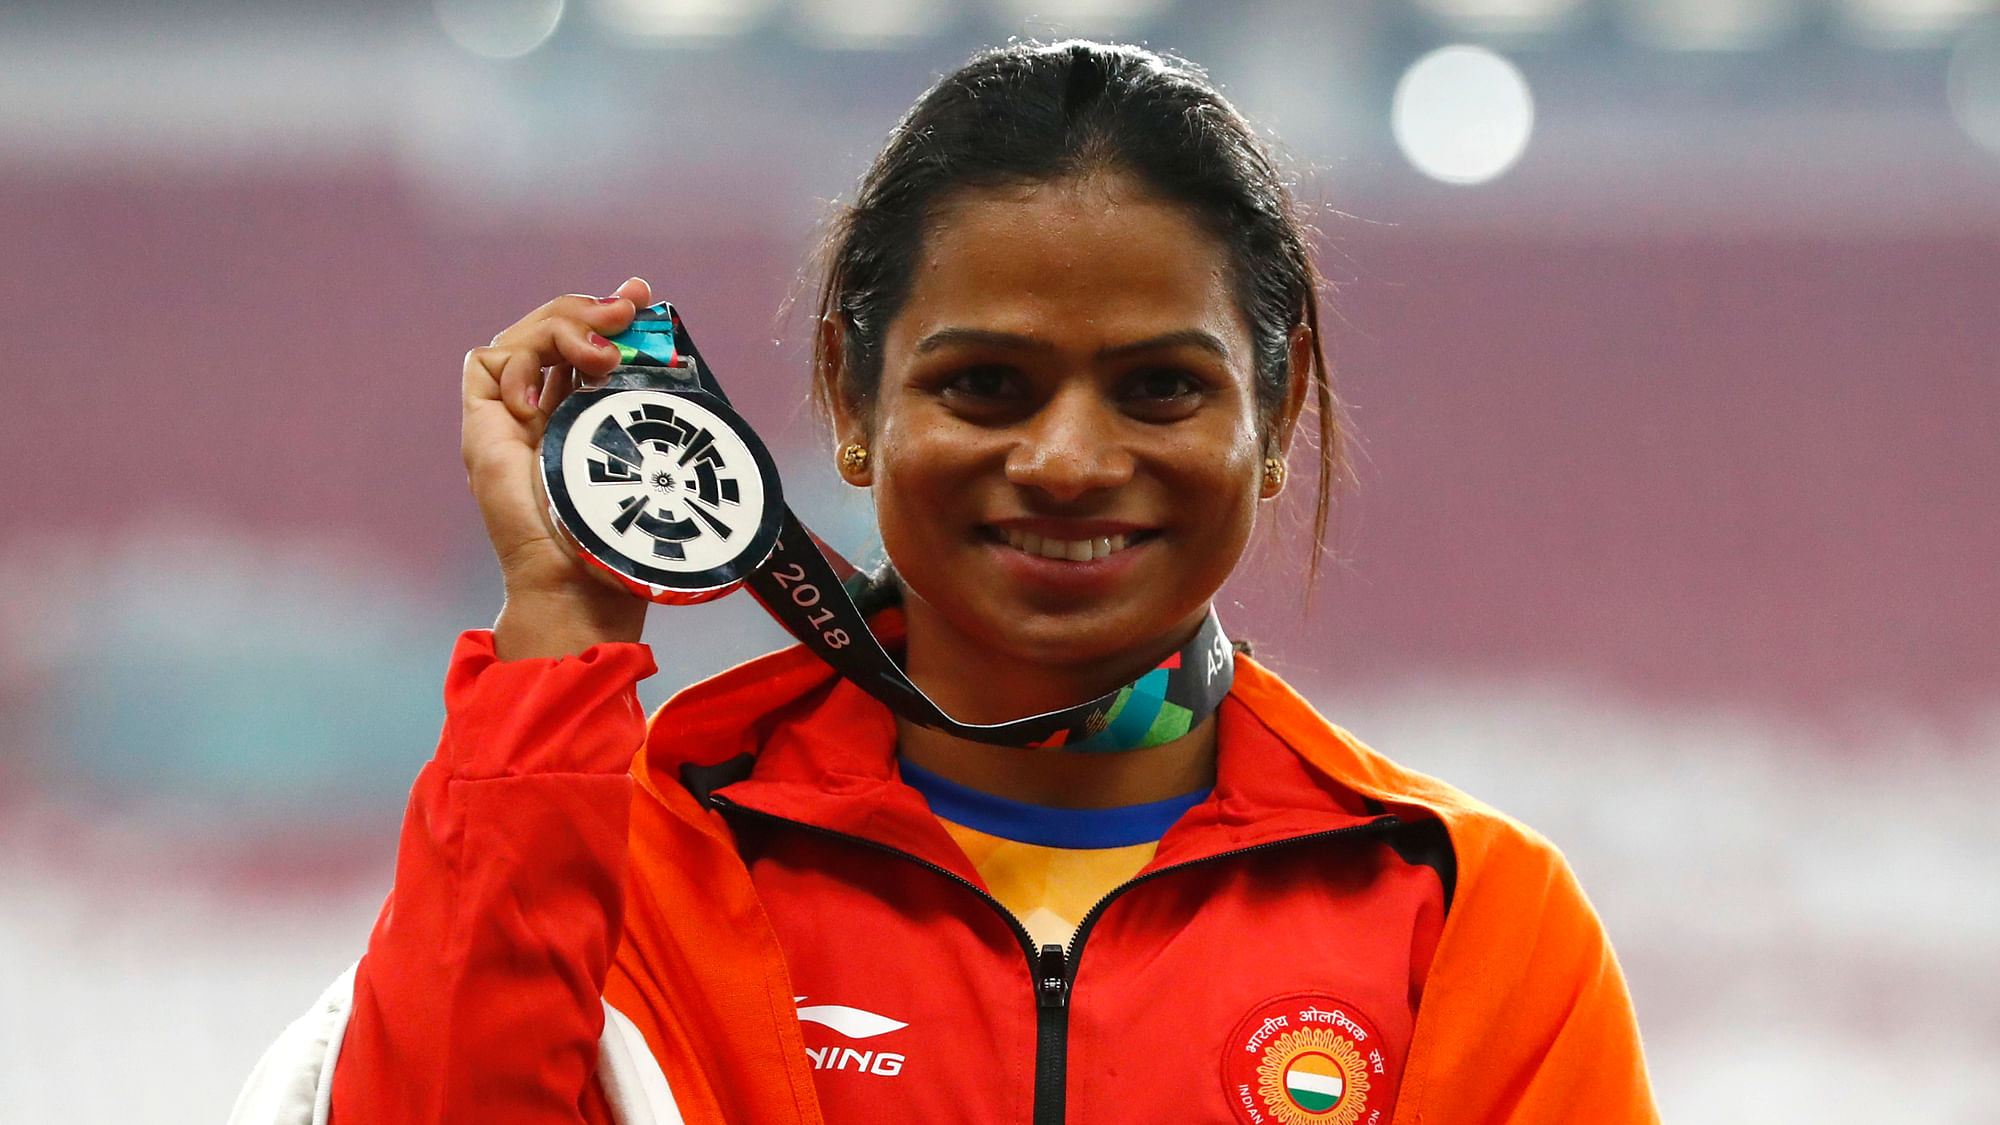 India’s Dutee Chand celebrates on the podium after winning the silver medal in the women’s 100m final during the athletics competition at the 18th Asian Games in Jakarta, Indonesia.